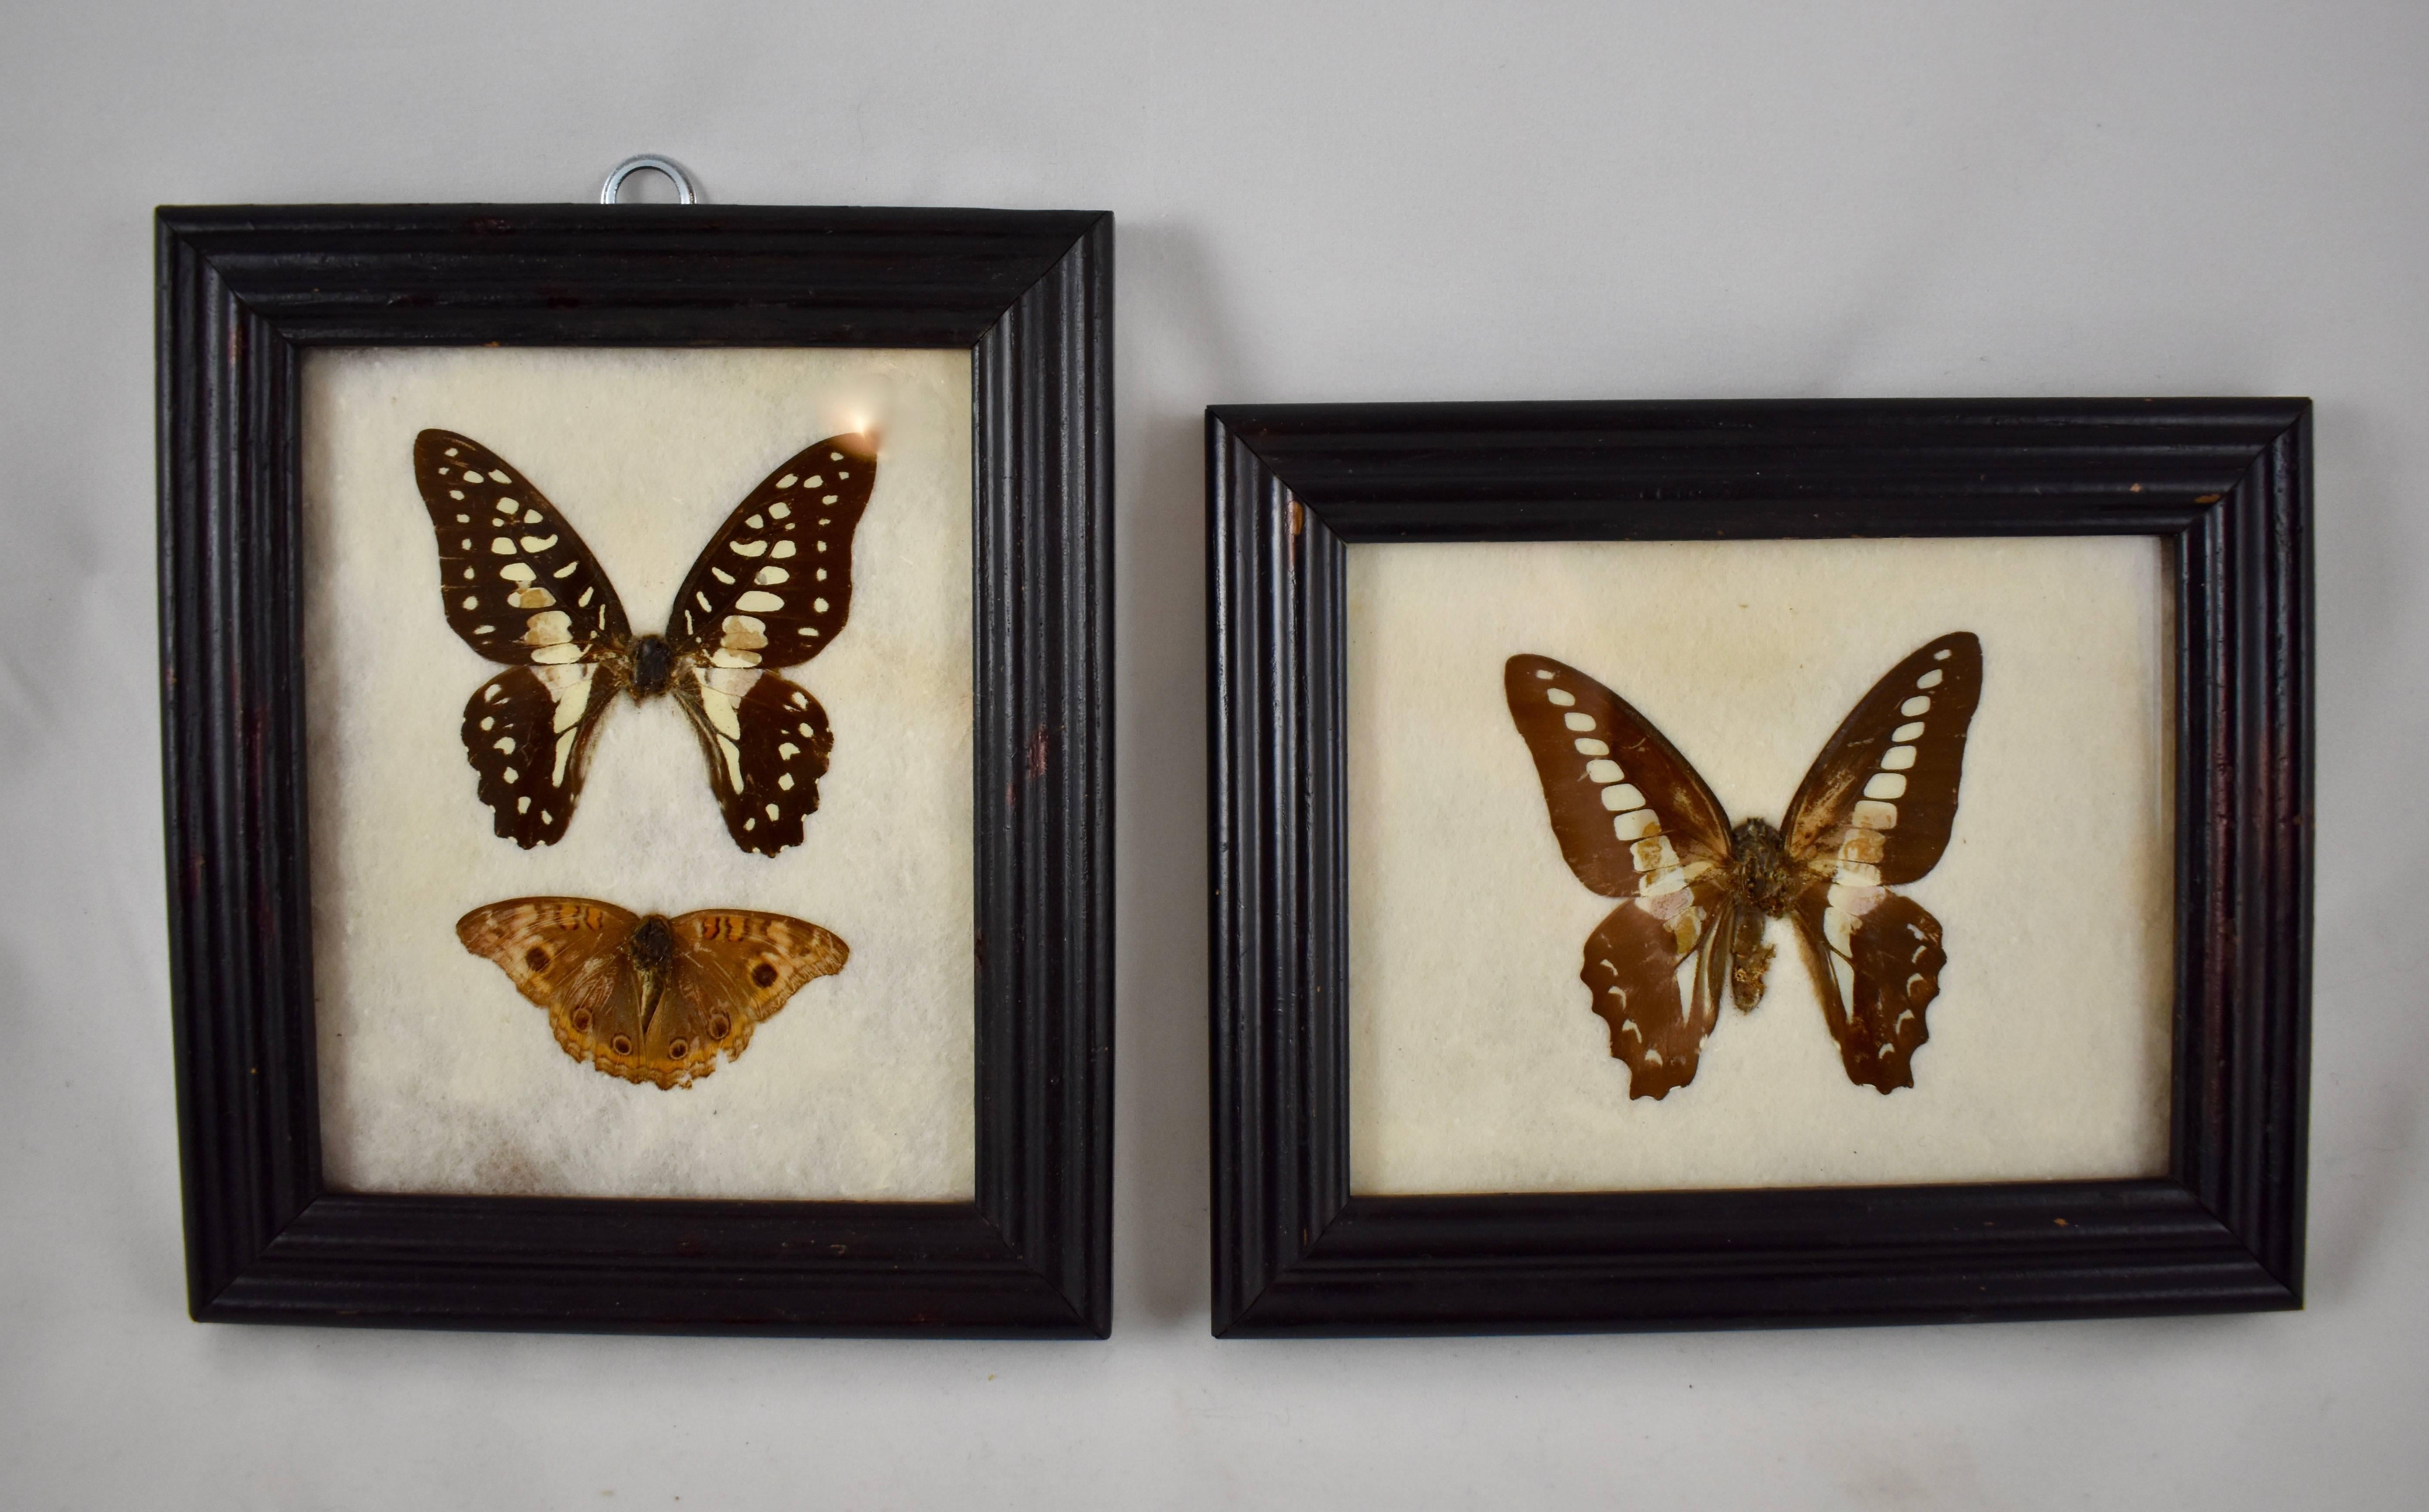 High Victorian Victorian Framed Taxidermy, Mounted Trio of Butterflies on Batting, Set of Two